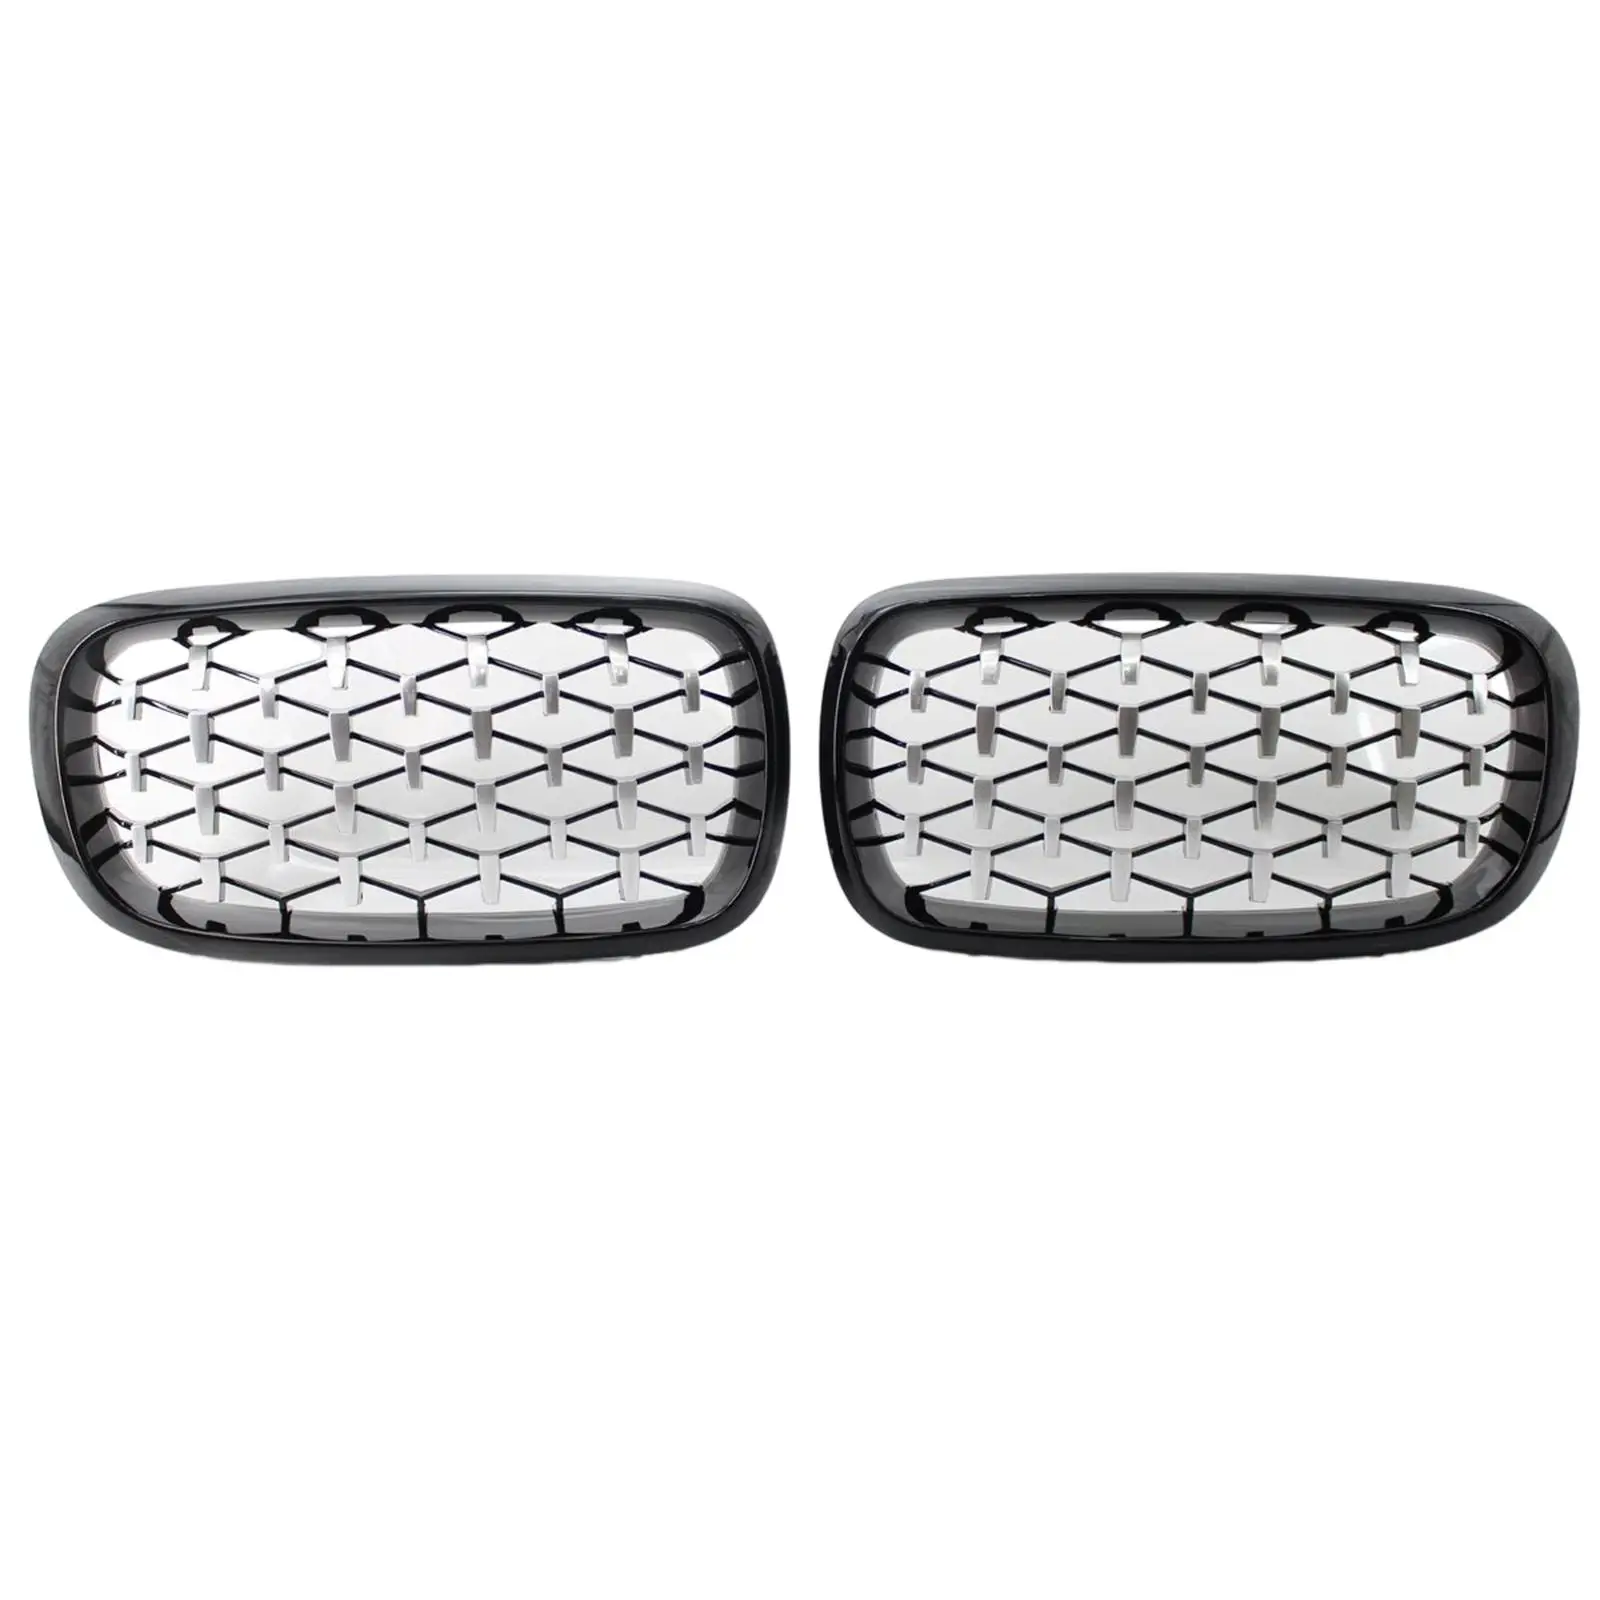 Front Grill Grille 51137316061 for BMW x5 F15 2014-2016 Replaces Car